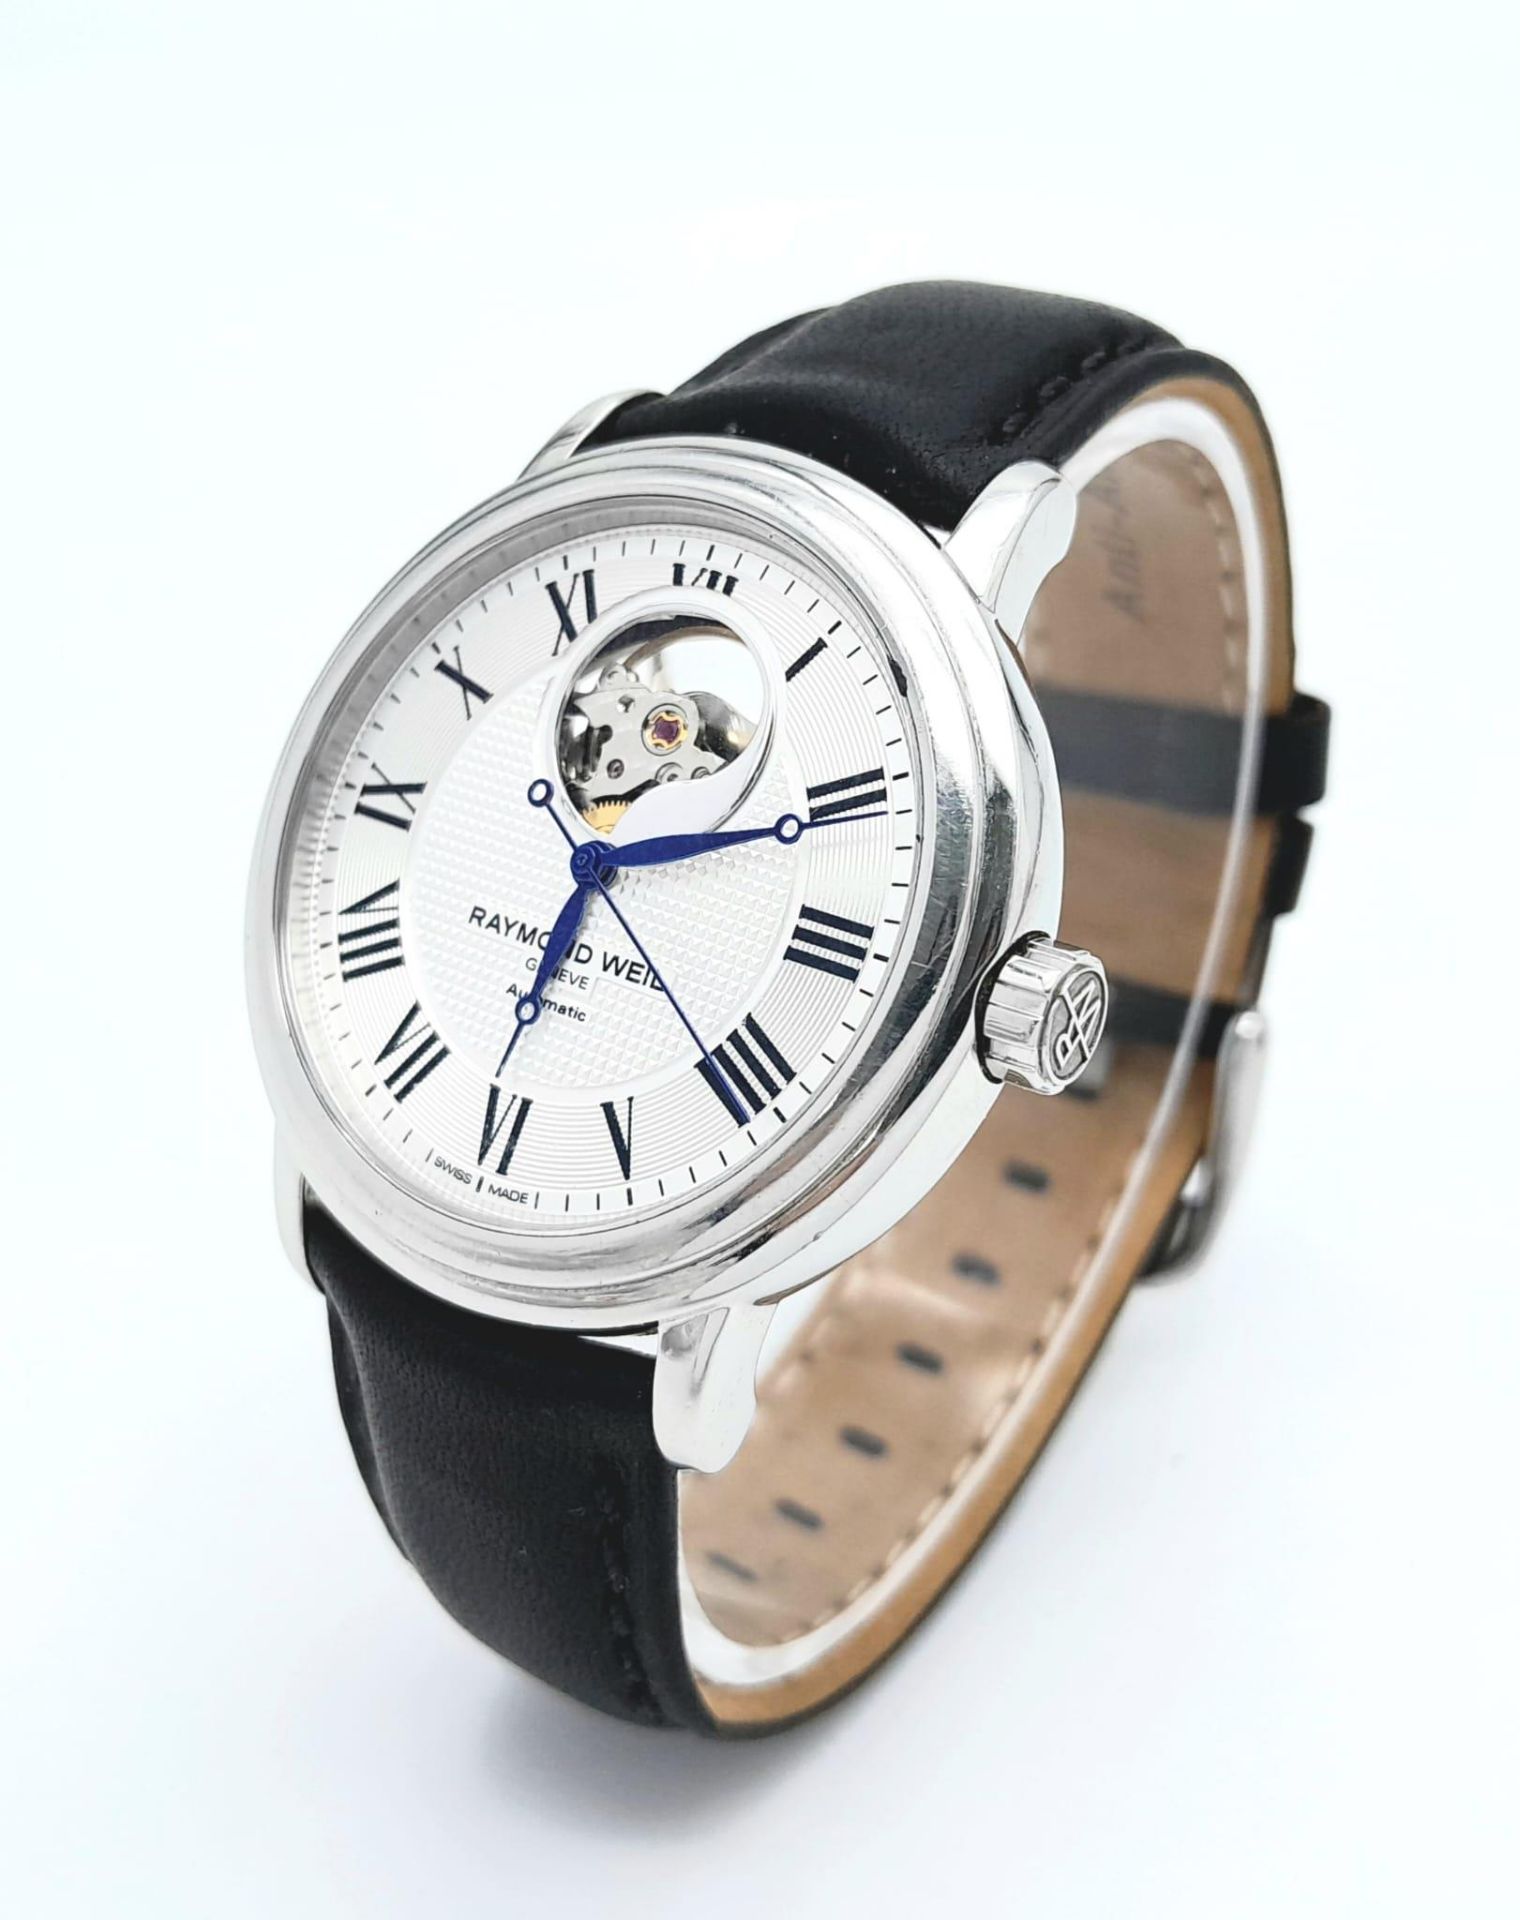 A Raymond Weil Automatic Gents Watch. Black leather strap. Stainless steel case - 40mm. Silver